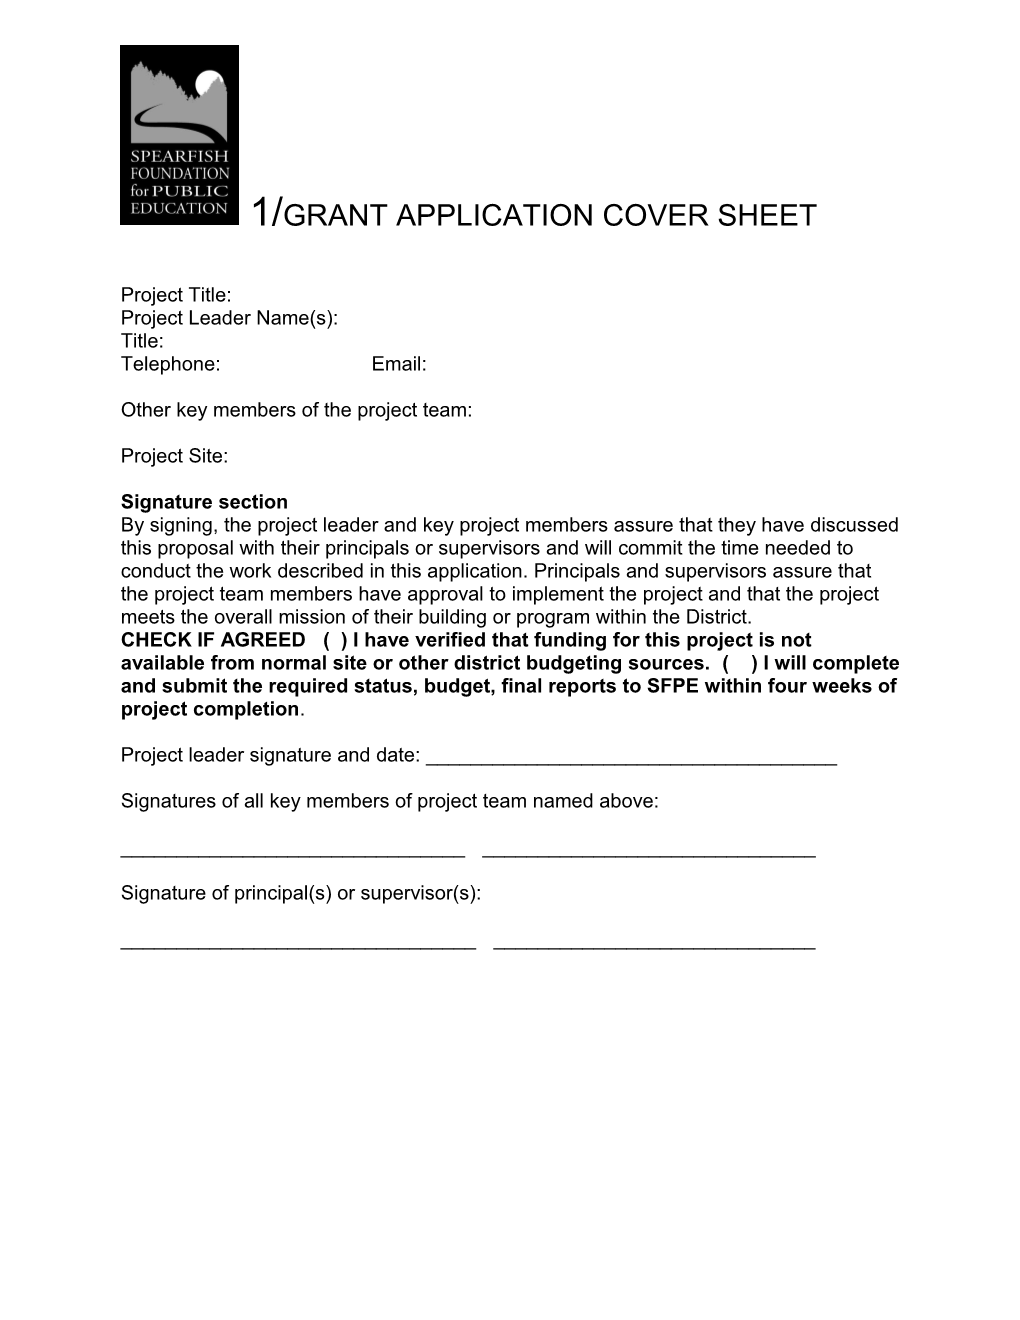 1/Grant Application Cover Sheet